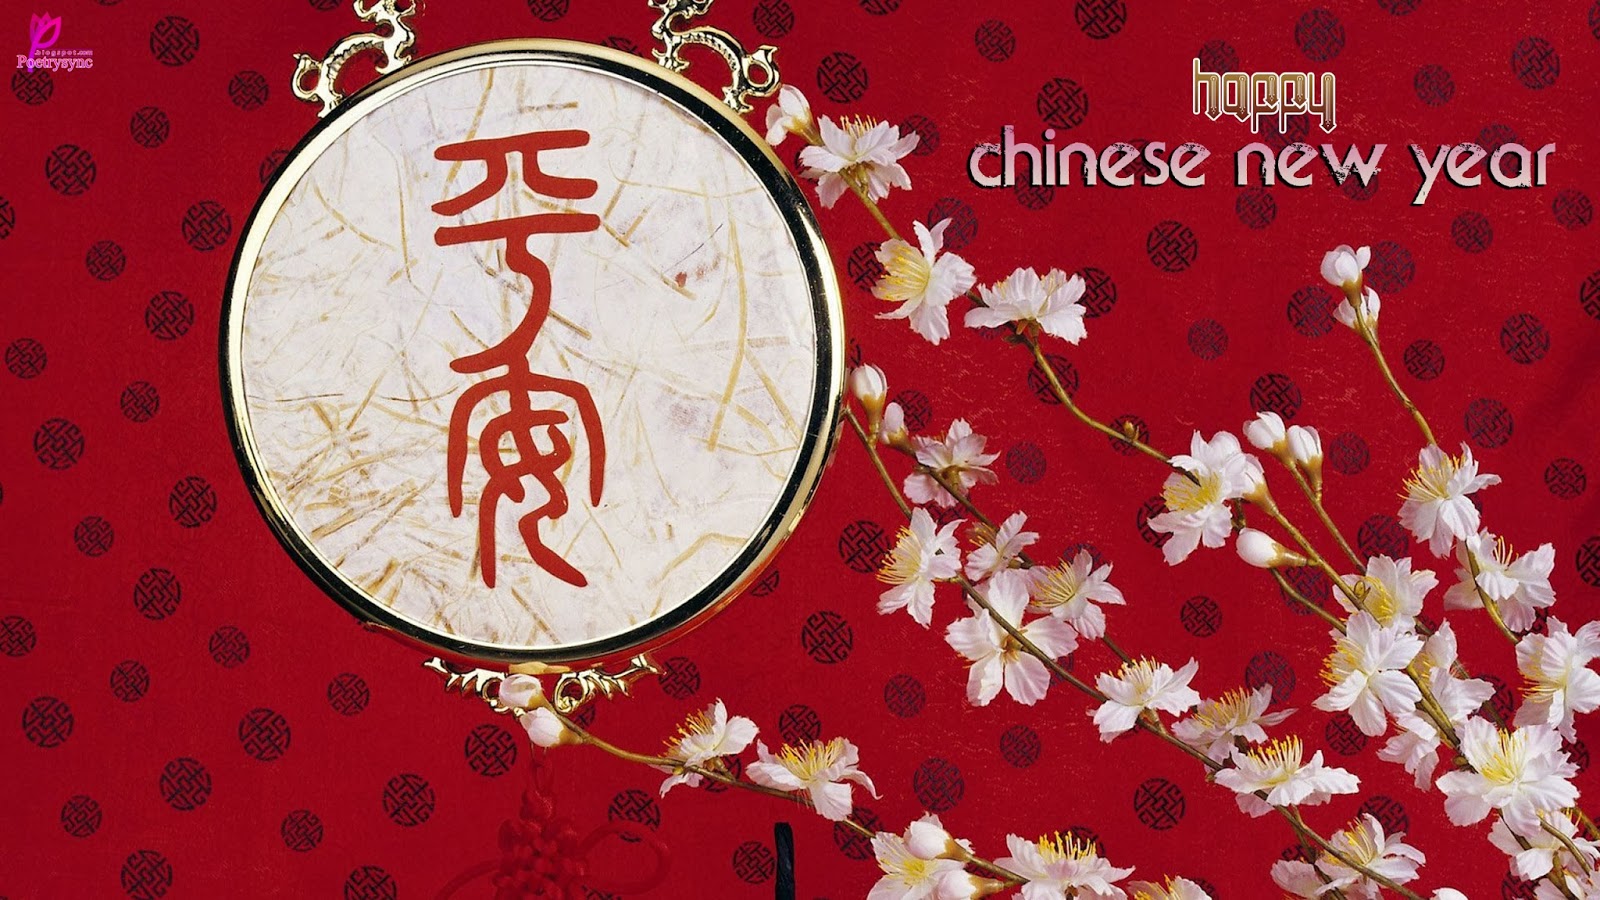 High Quality Lunar New Year Wallpaper Full HD Pictures